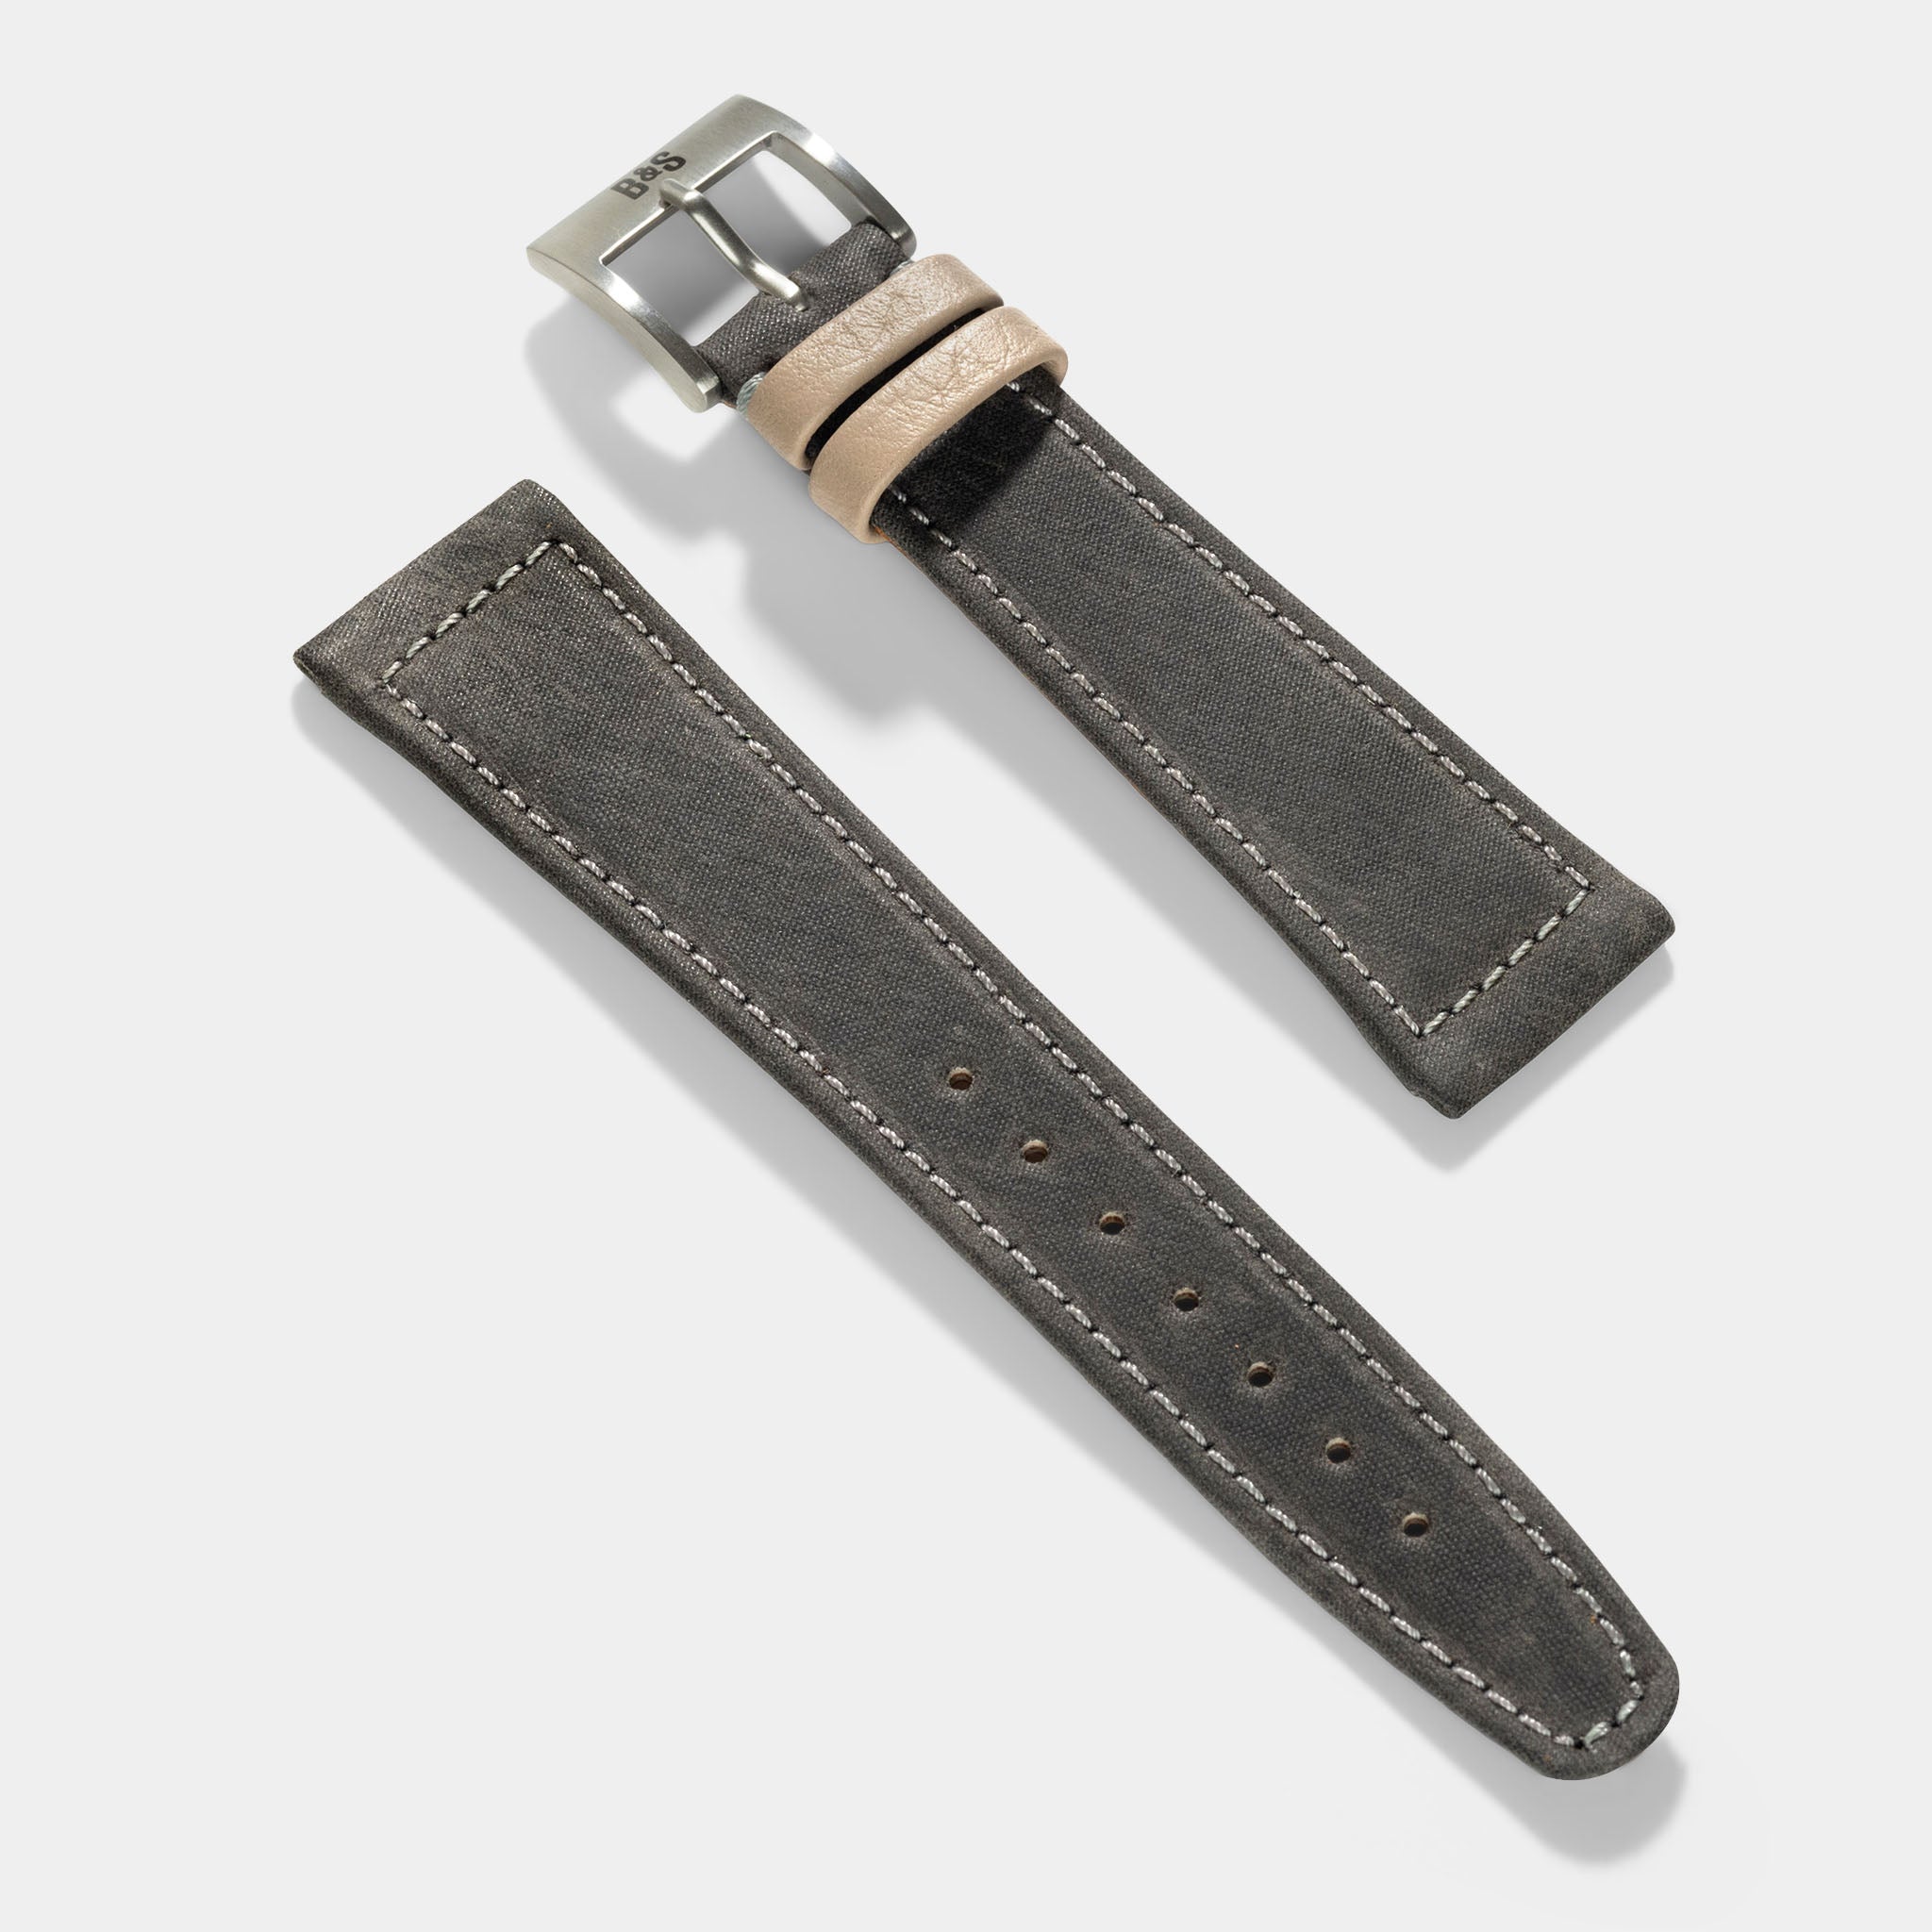 The Stonehenge Watch Strap - Made of Vintage Barbour Fabric - Jubilee Edition